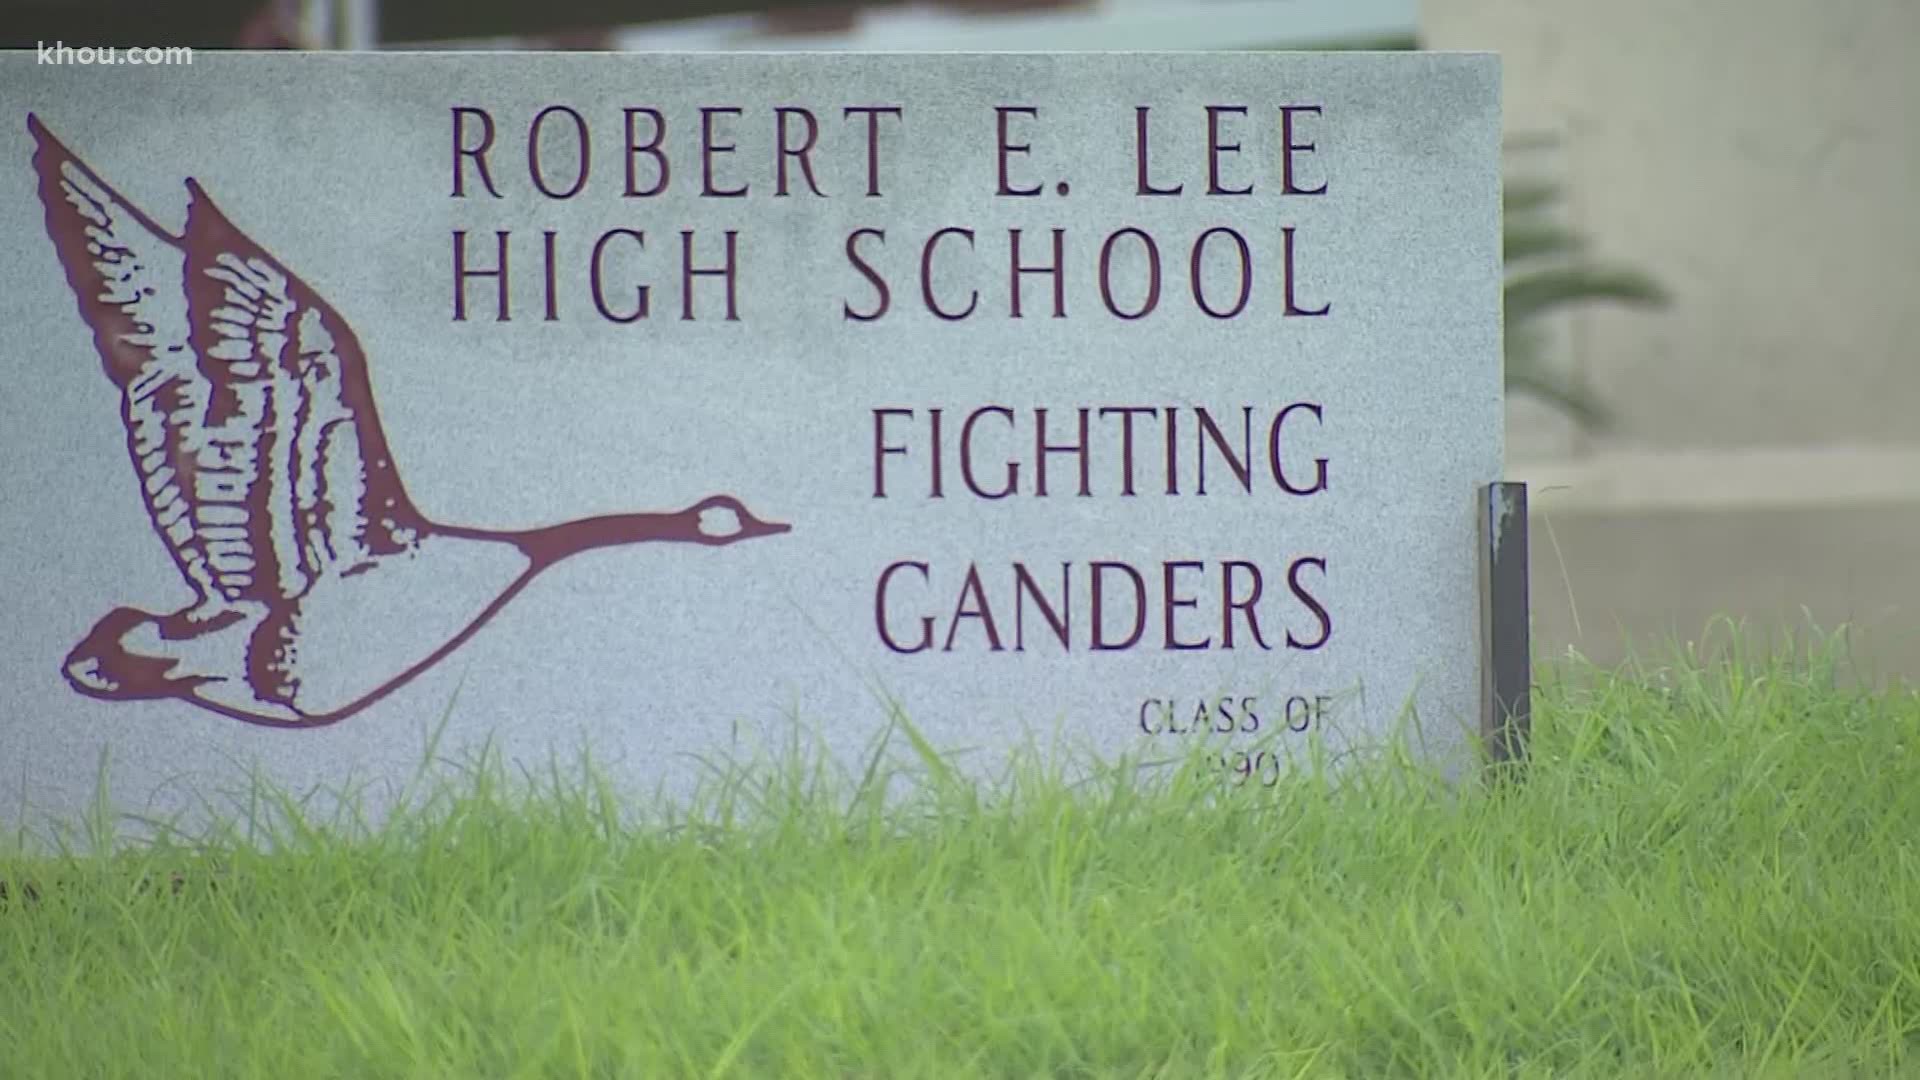 There's a debate underway in Baytown over whether the name of Robert E. Lee High School should be changed.